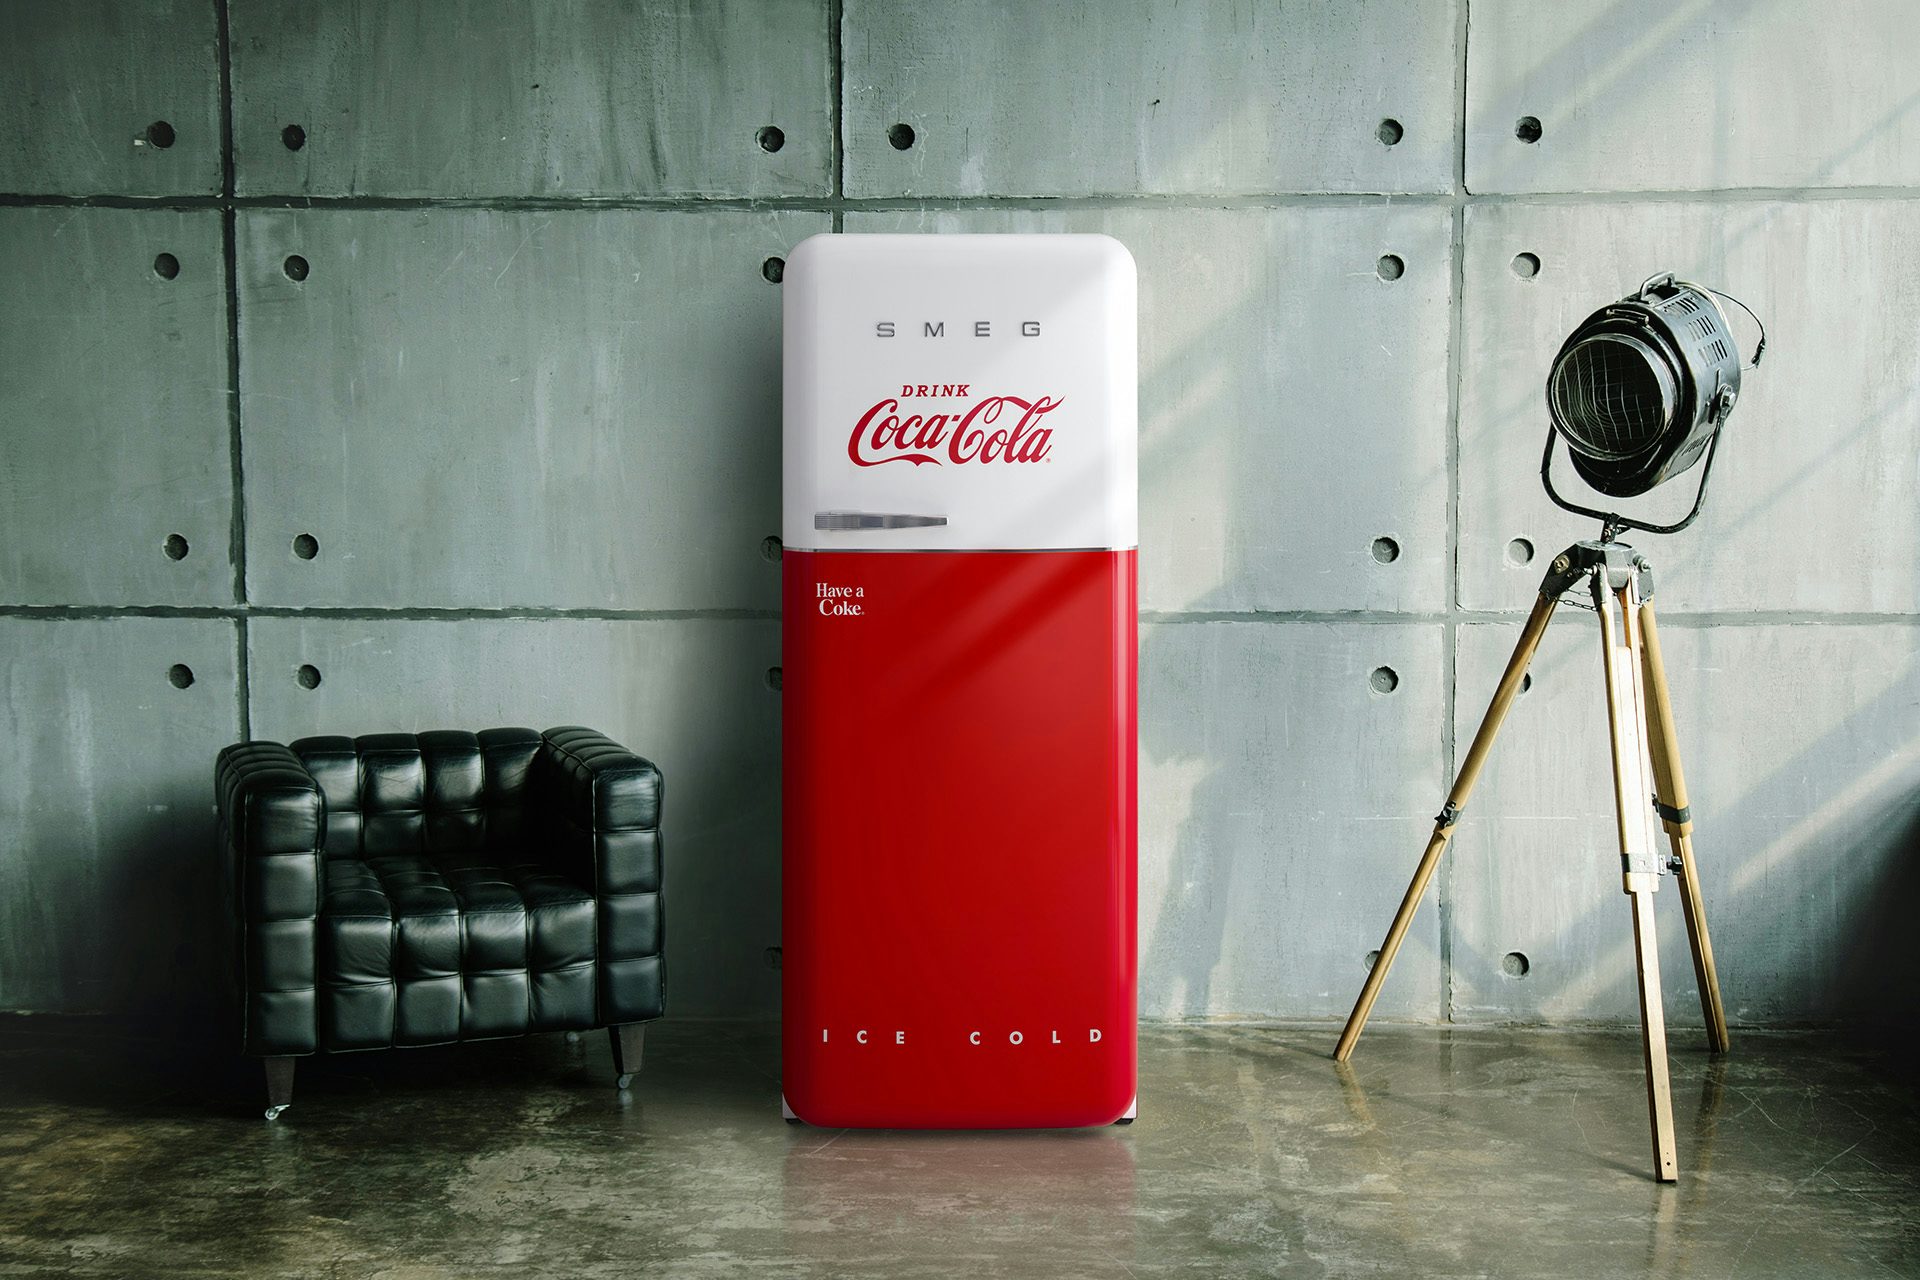 Photograph of a Smeg and Coca-Cola branded fridge in red and white